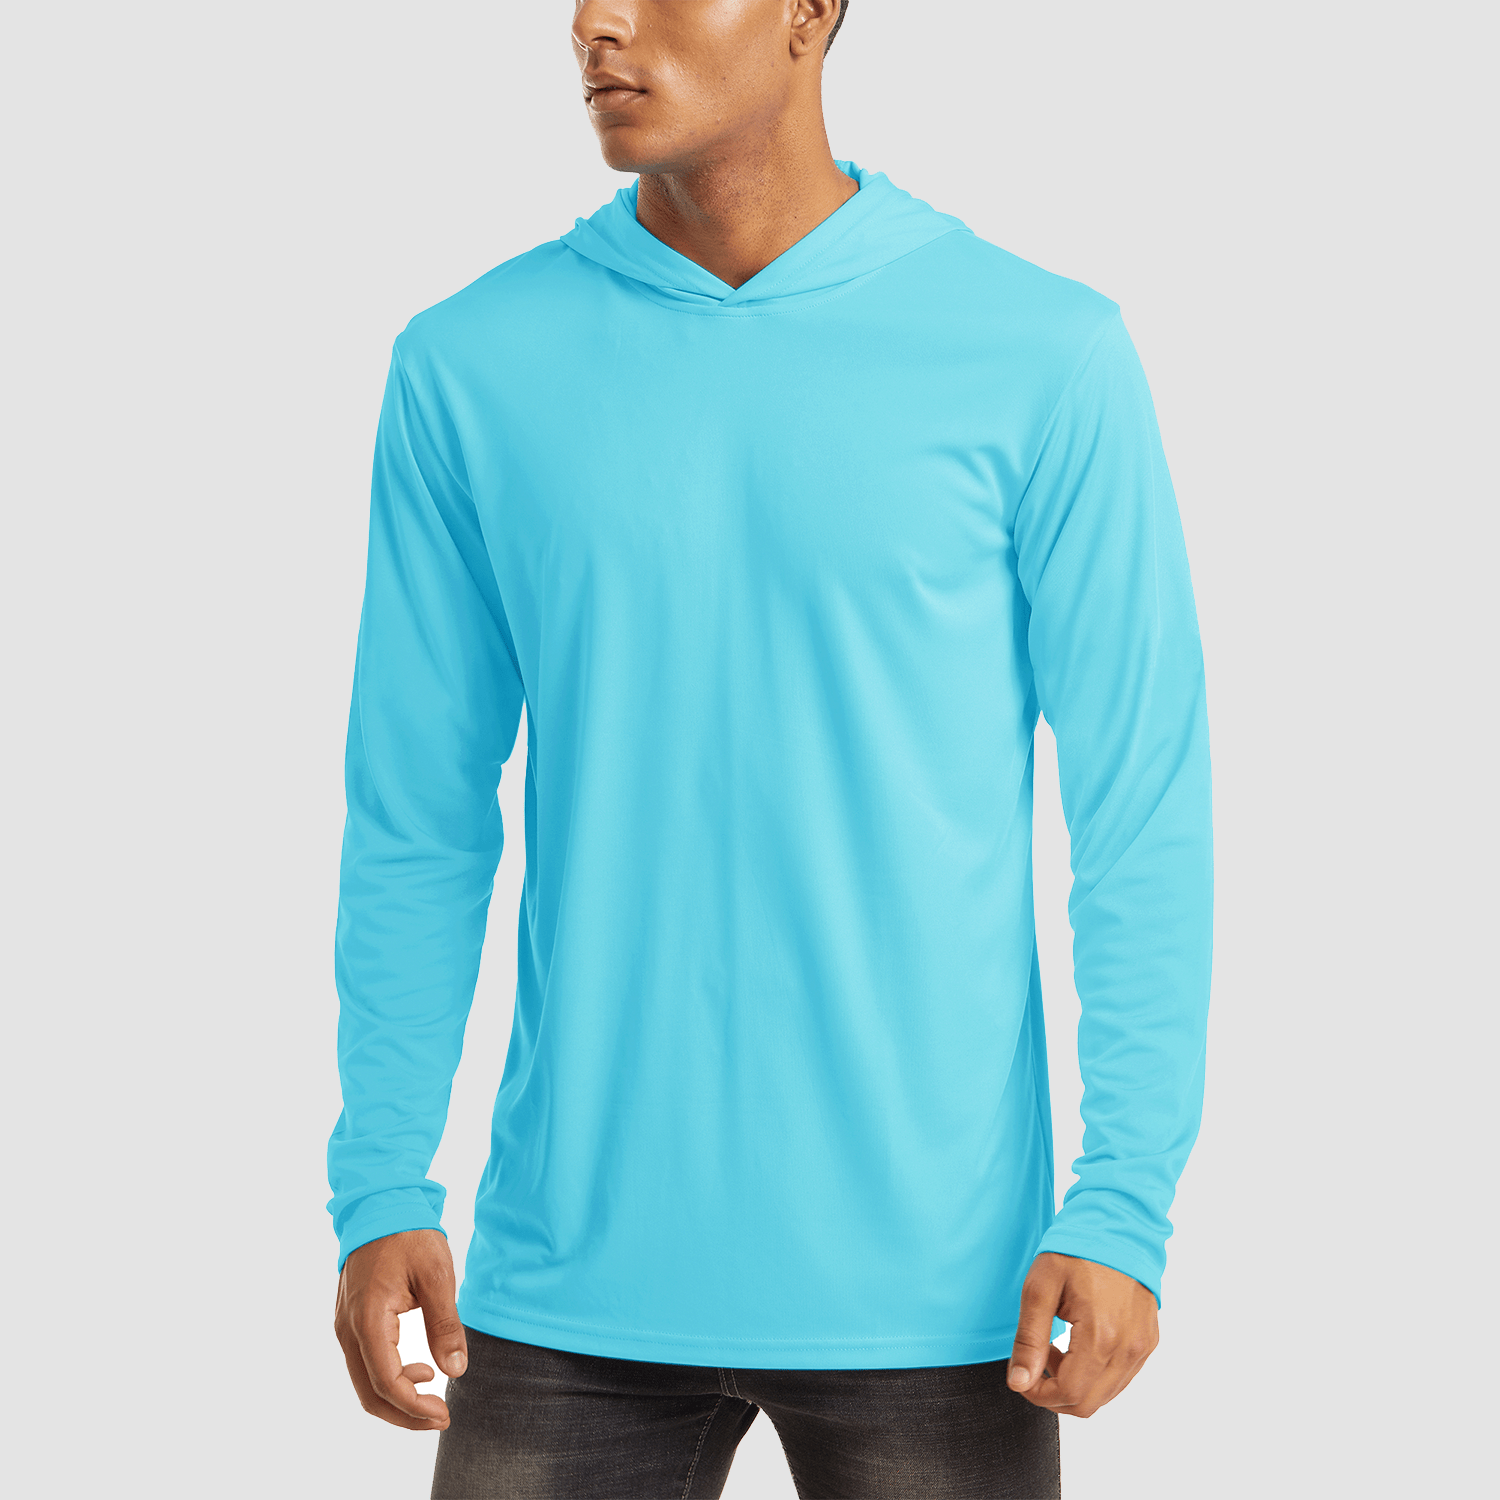 Mens Sun protection clothing T-Shirt Hoodie Long Sleeve Tops